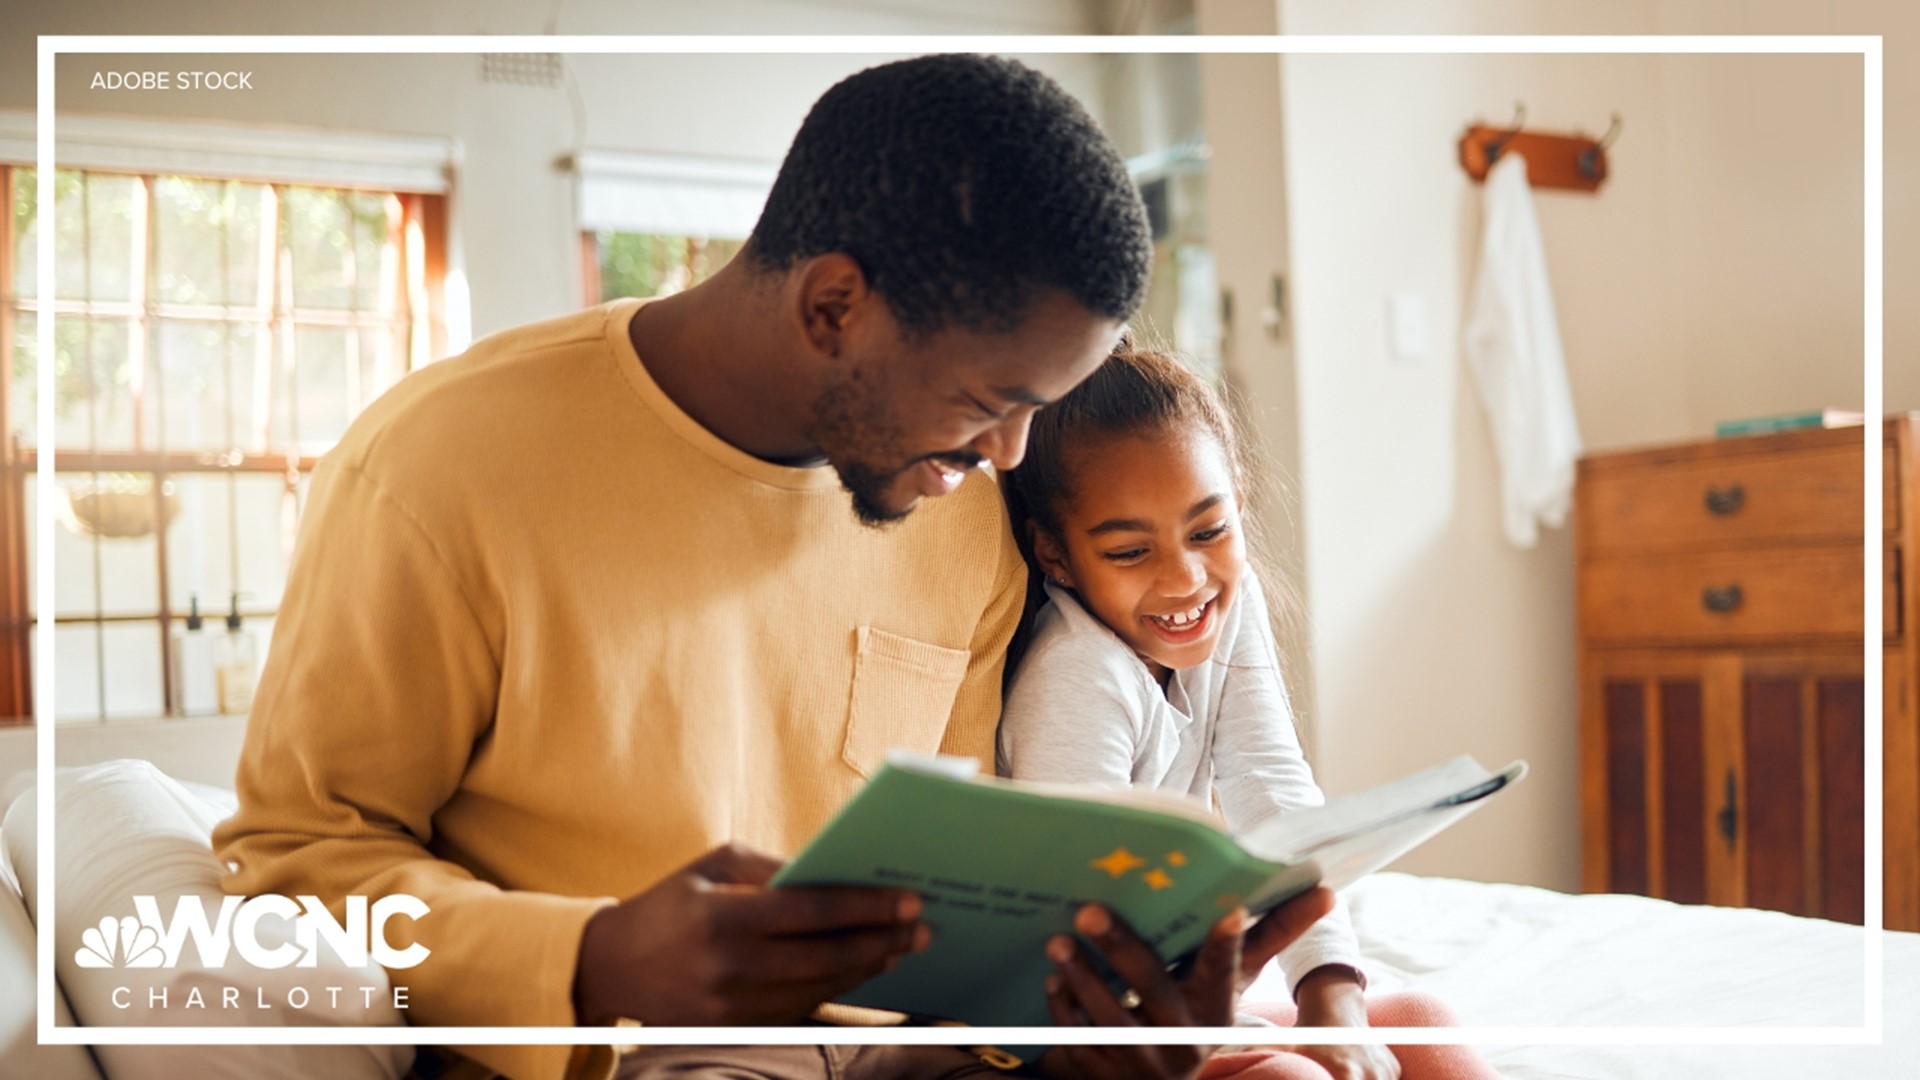 Writers at Forbes said a poll surveying single Black moms showed the vast majority are concerned about their child's academic progress.